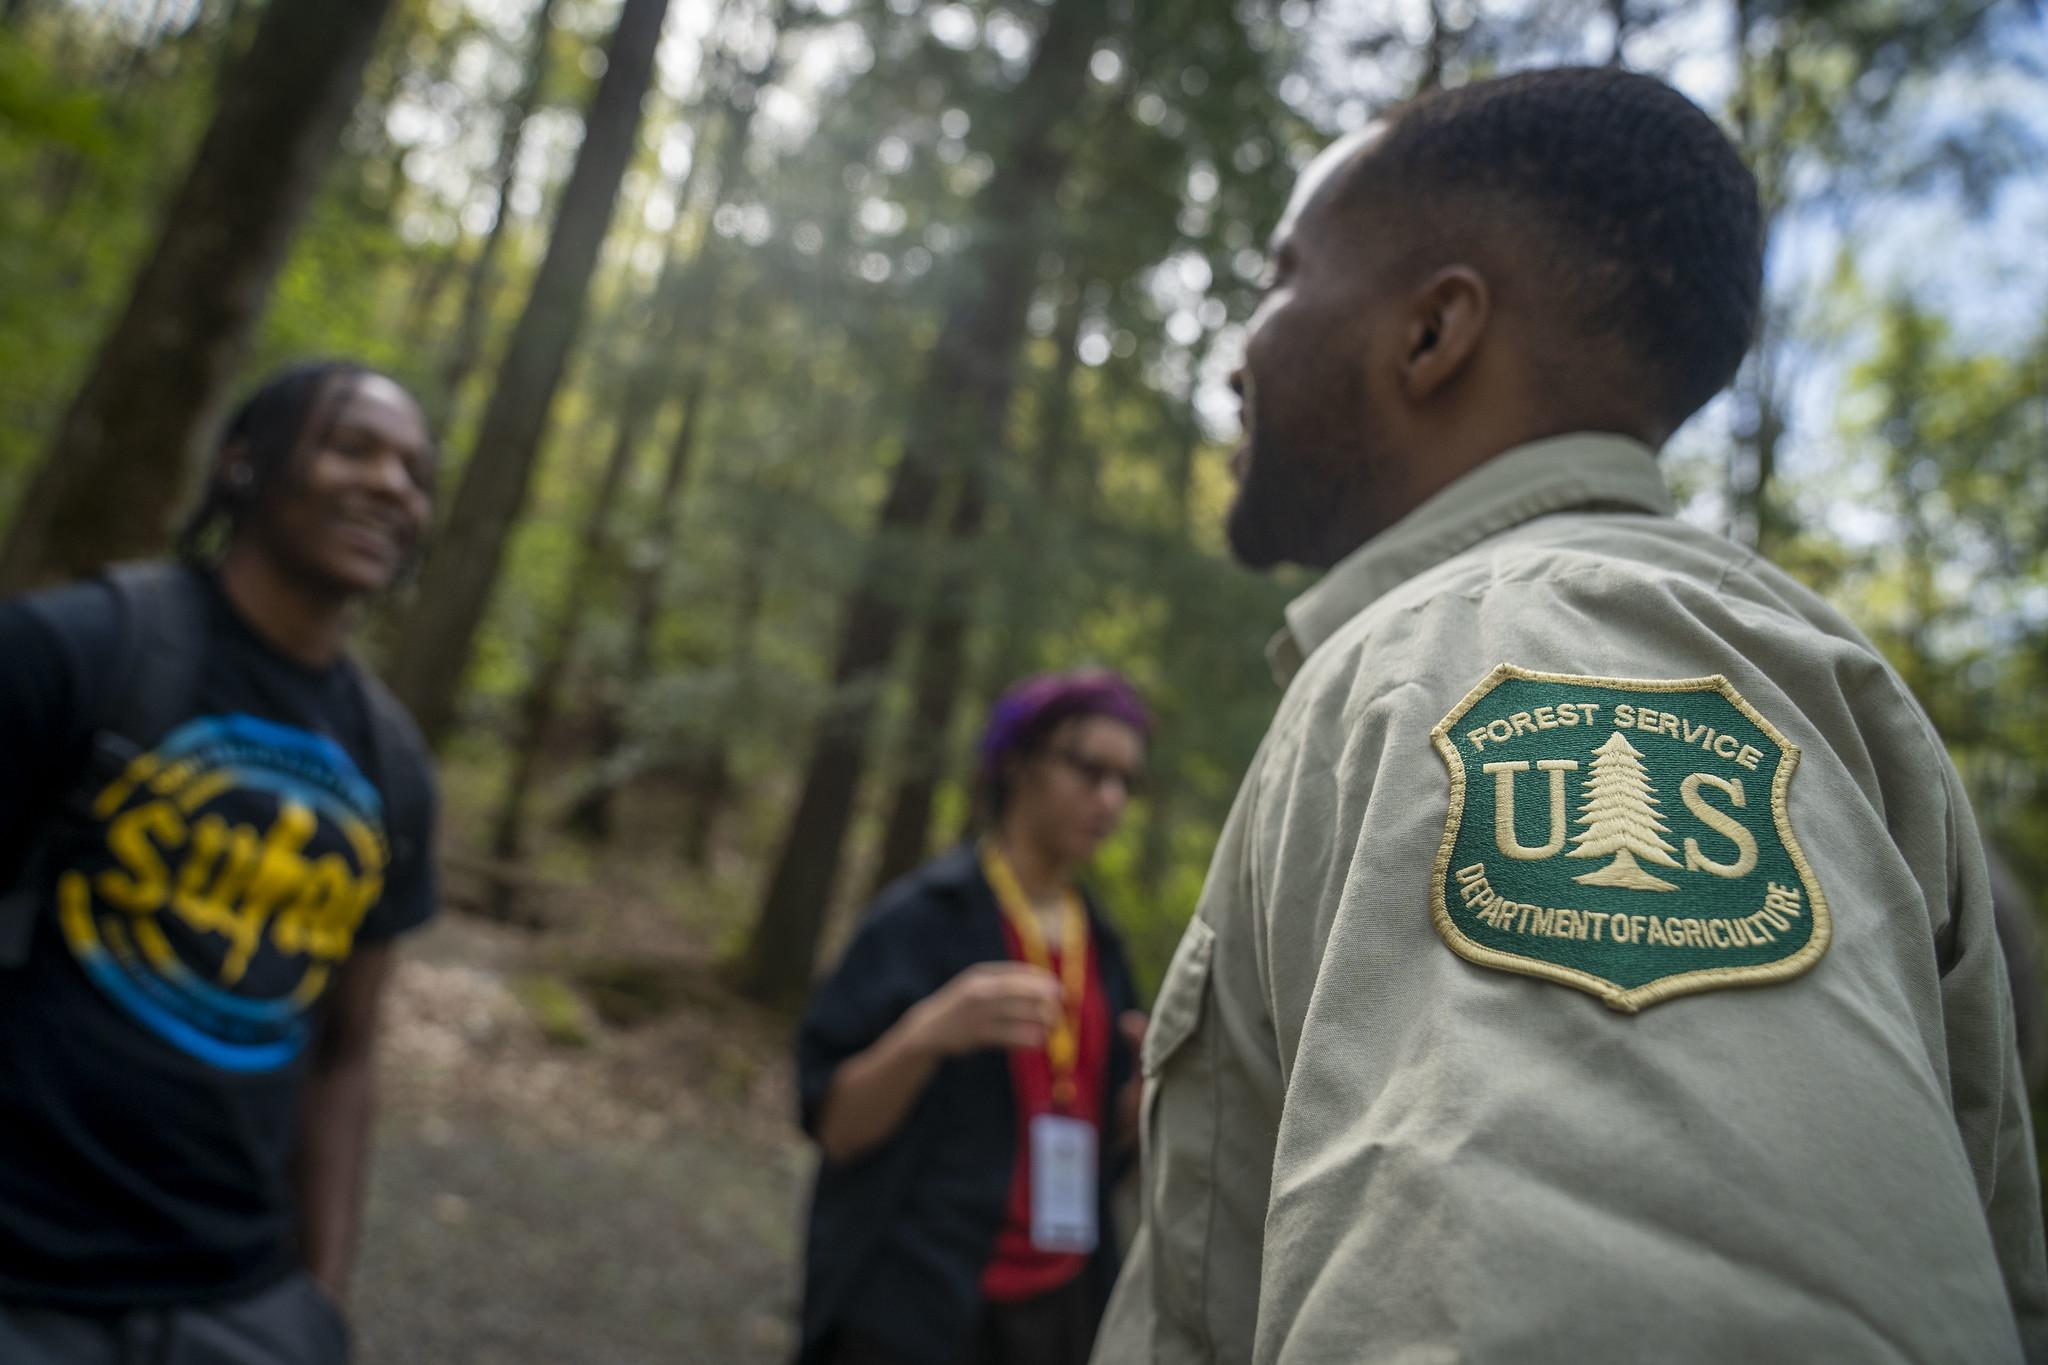 A recruiter speaks to a job seeker on a field trip in the forest.